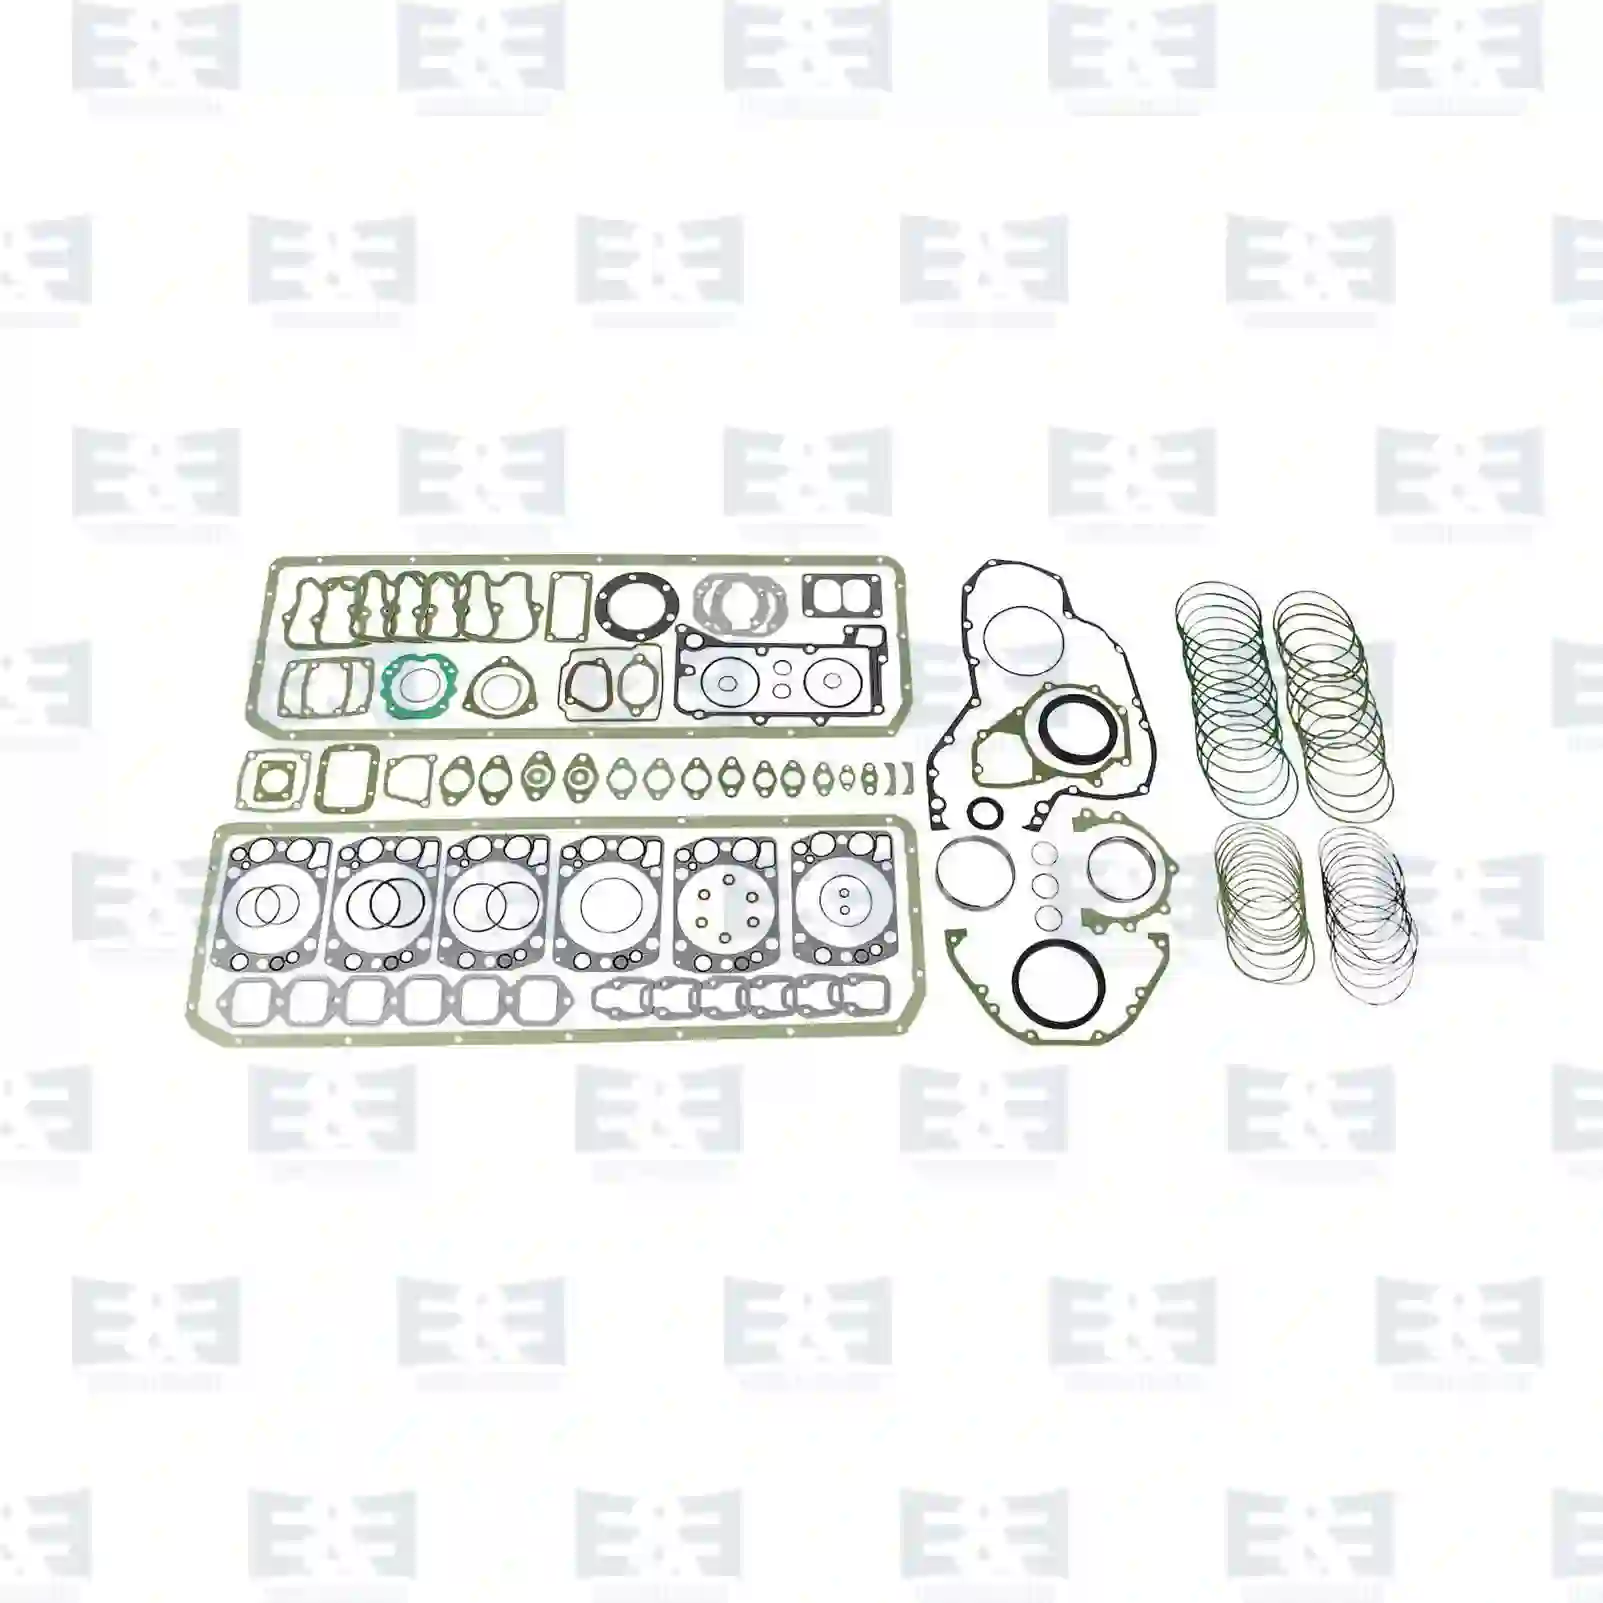 General overhaul kit, complete with race rings, 2E2200122, 51009006398, 51 ||  2E2200122 E&E Truck Spare Parts | Truck Spare Parts, Auotomotive Spare Parts General overhaul kit, complete with race rings, 2E2200122, 51009006398, 51 ||  2E2200122 E&E Truck Spare Parts | Truck Spare Parts, Auotomotive Spare Parts